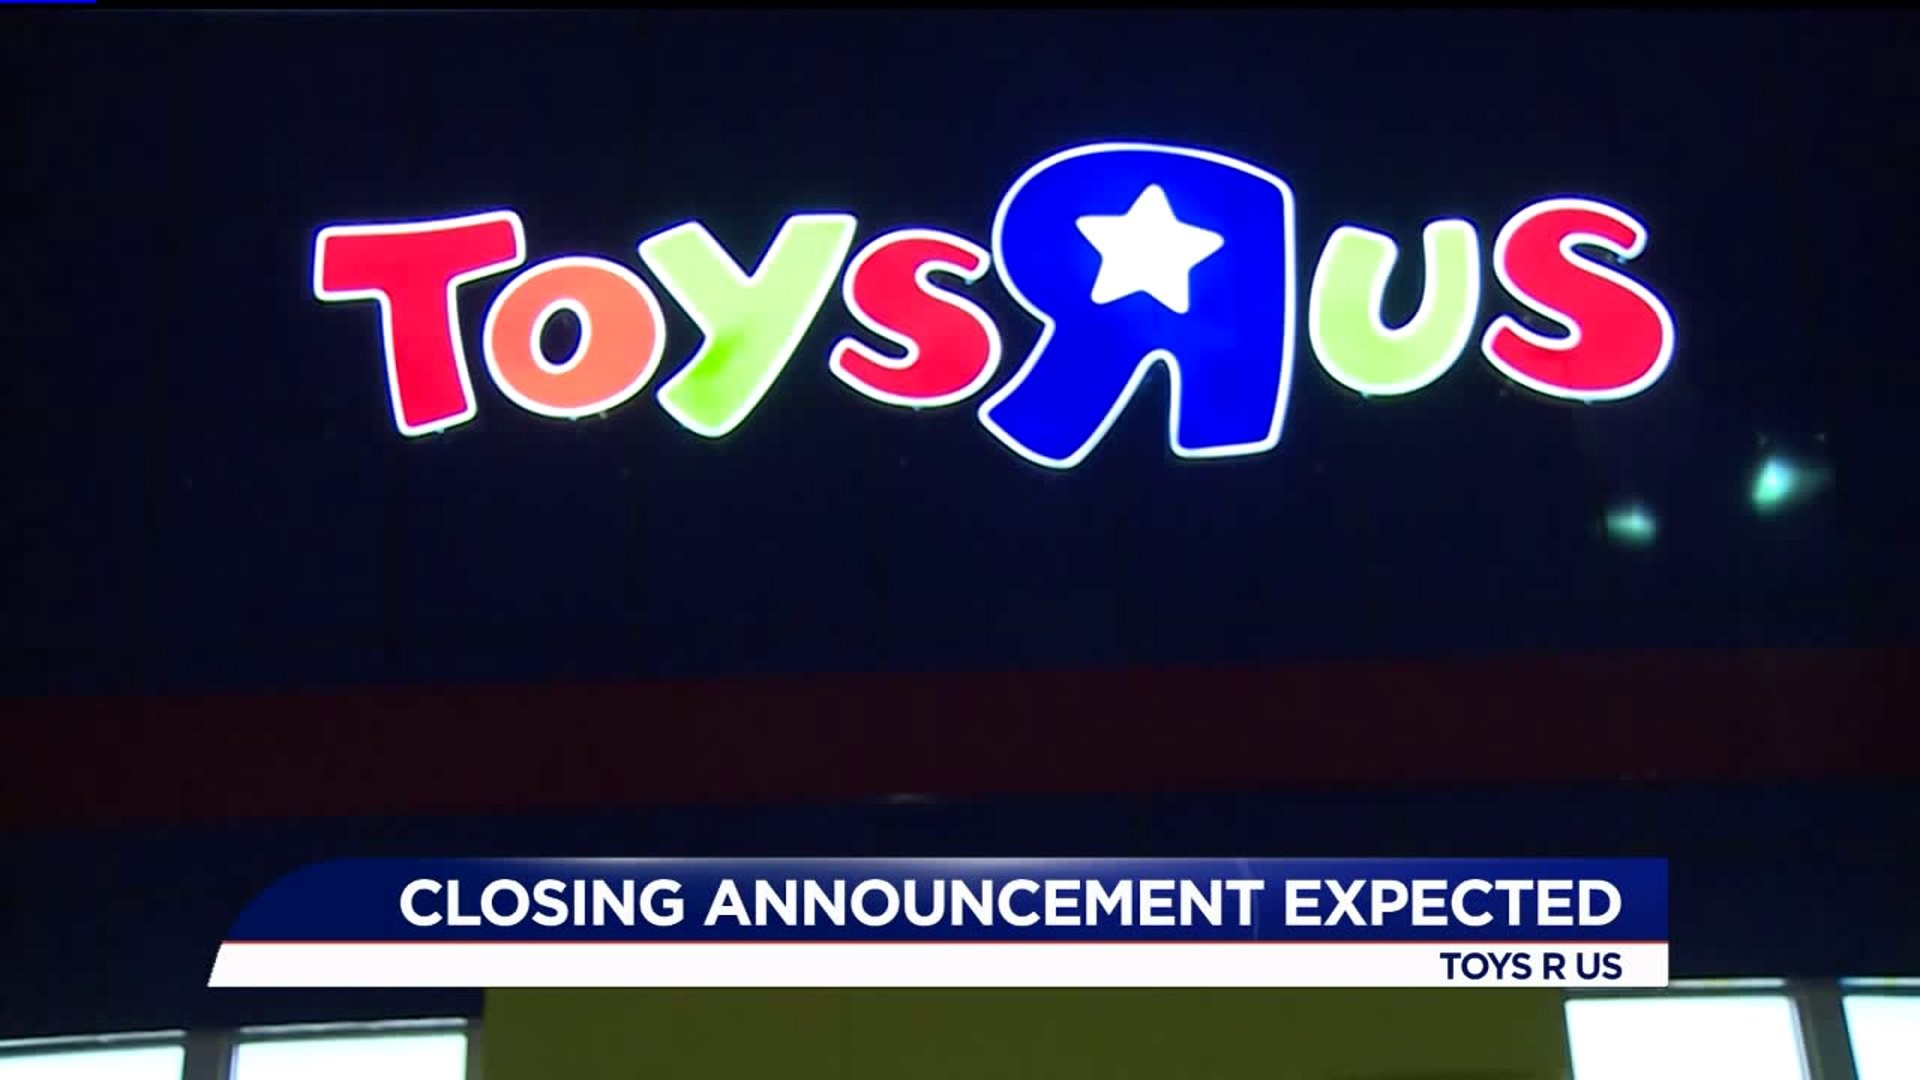 Toys R Us Expected to Liquidate All Stores